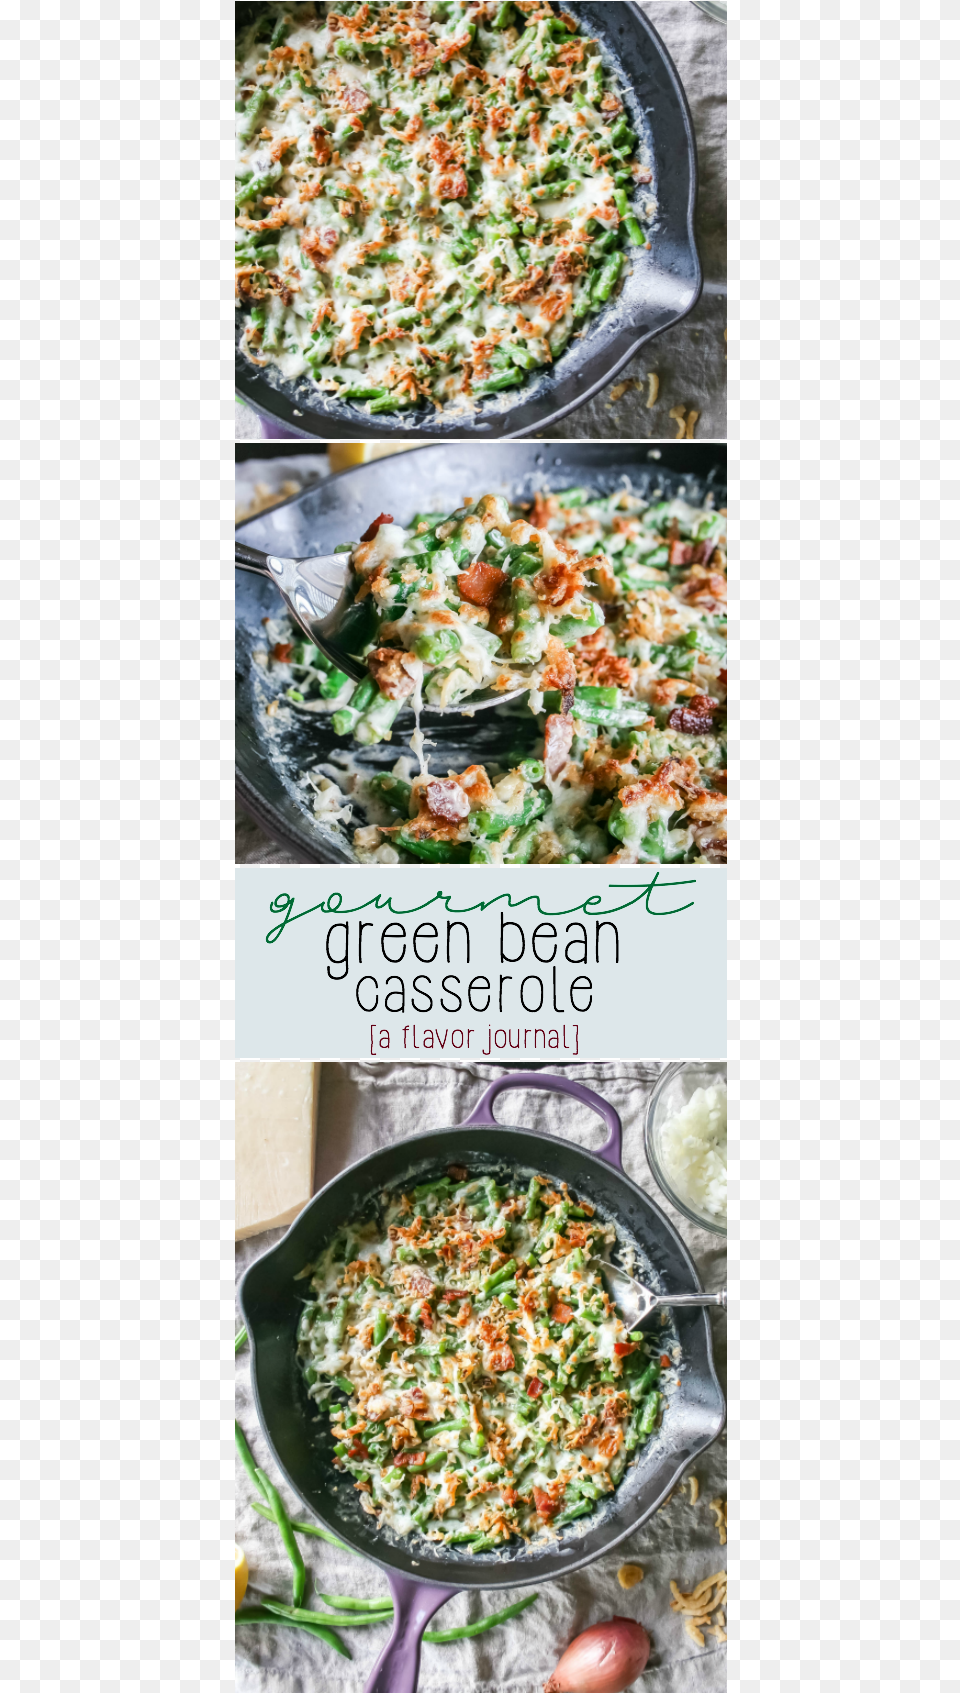 This Is My Favorite Green Bean Casserole It Uses Fresh Green Bean Casserole, Food, Lunch, Meal, Produce Png Image